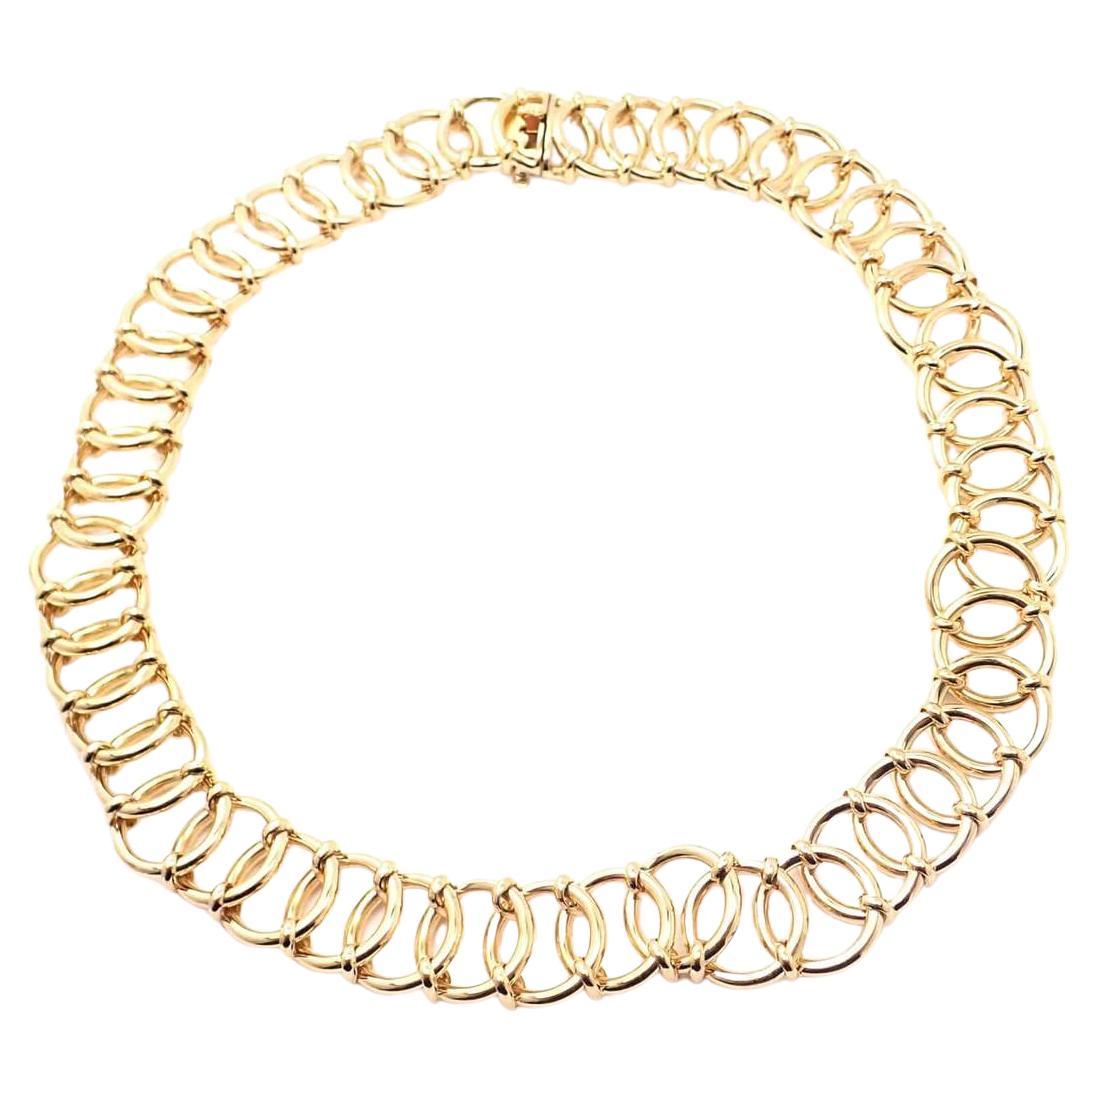 Tiffany & Co Collier vintage Paloma Picasso France à maillons ronds ouverts en or jaune